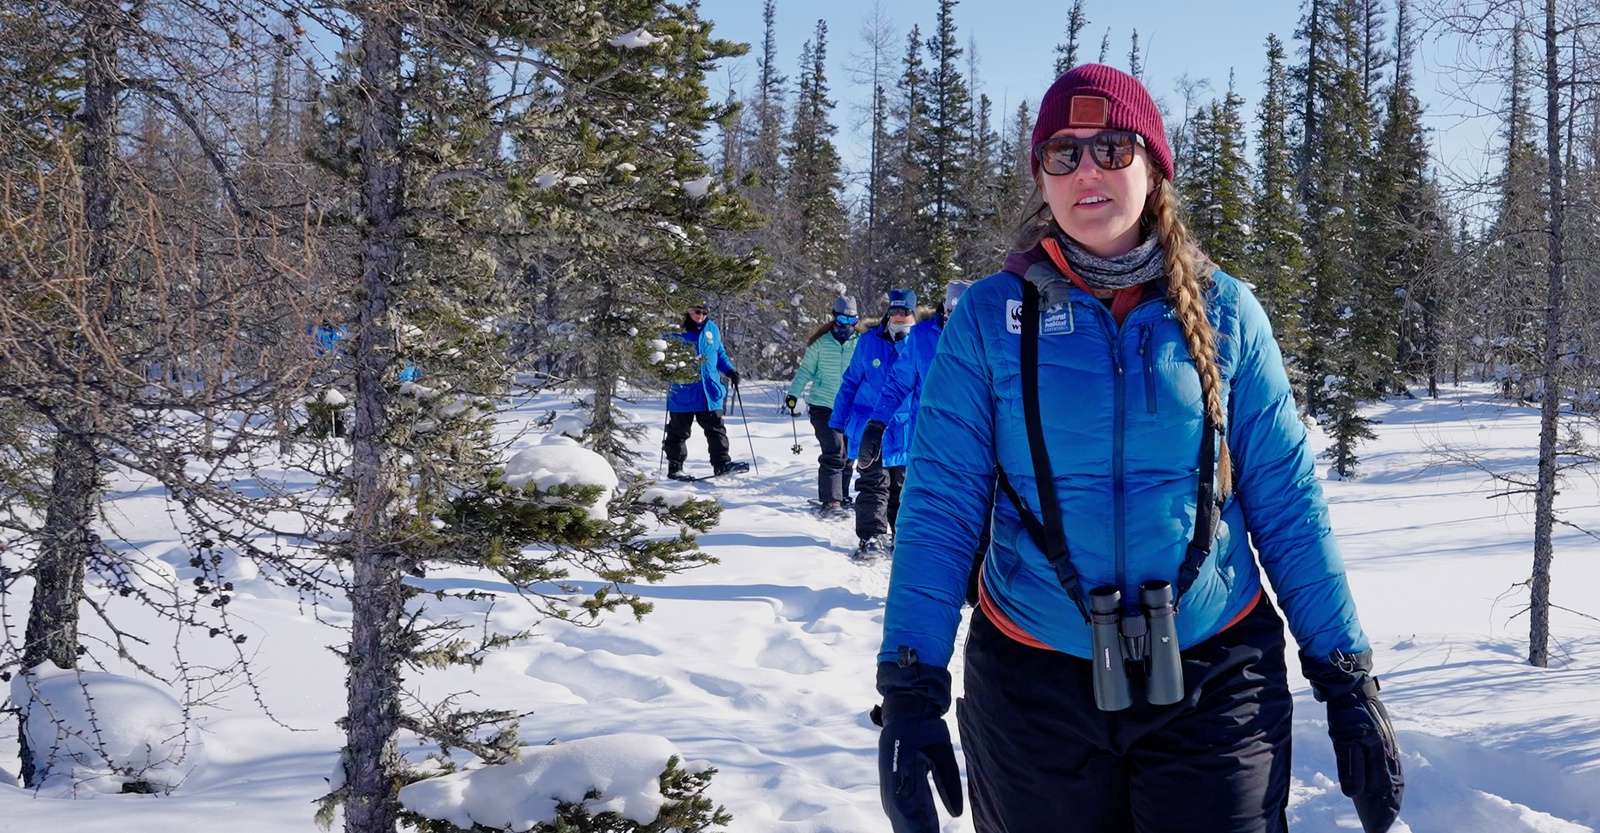 Expedition Leader Lianne Thompson guiding Nat Hab guests, Churchill, Manitoba.